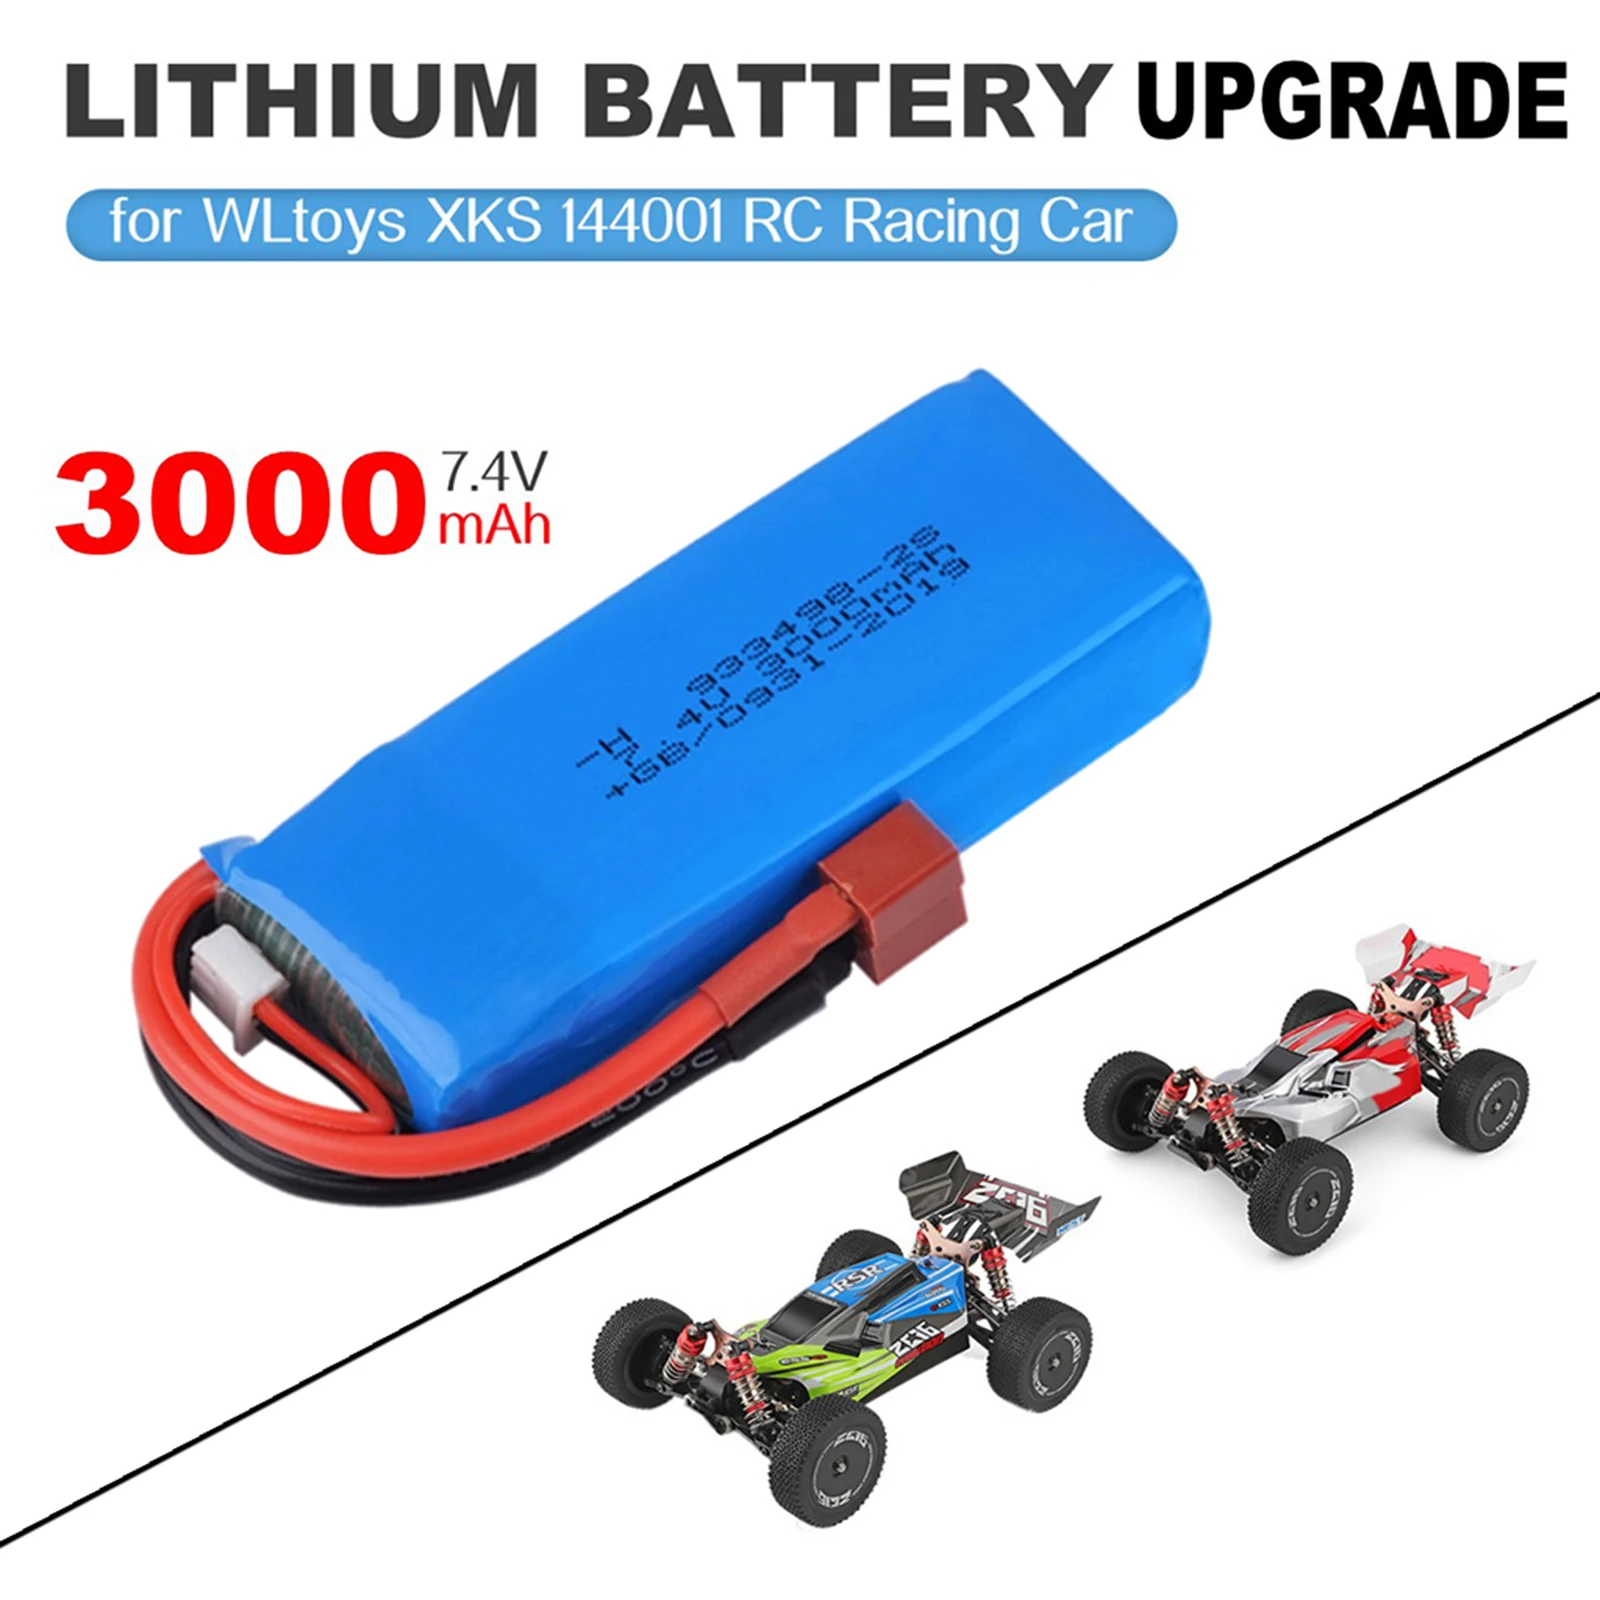 Rechargeable 2S 7.4V 3000mAh Lithium Polymer Batteries for WLTOYS XKS 144001 1240181 Remote Control RC Model Car